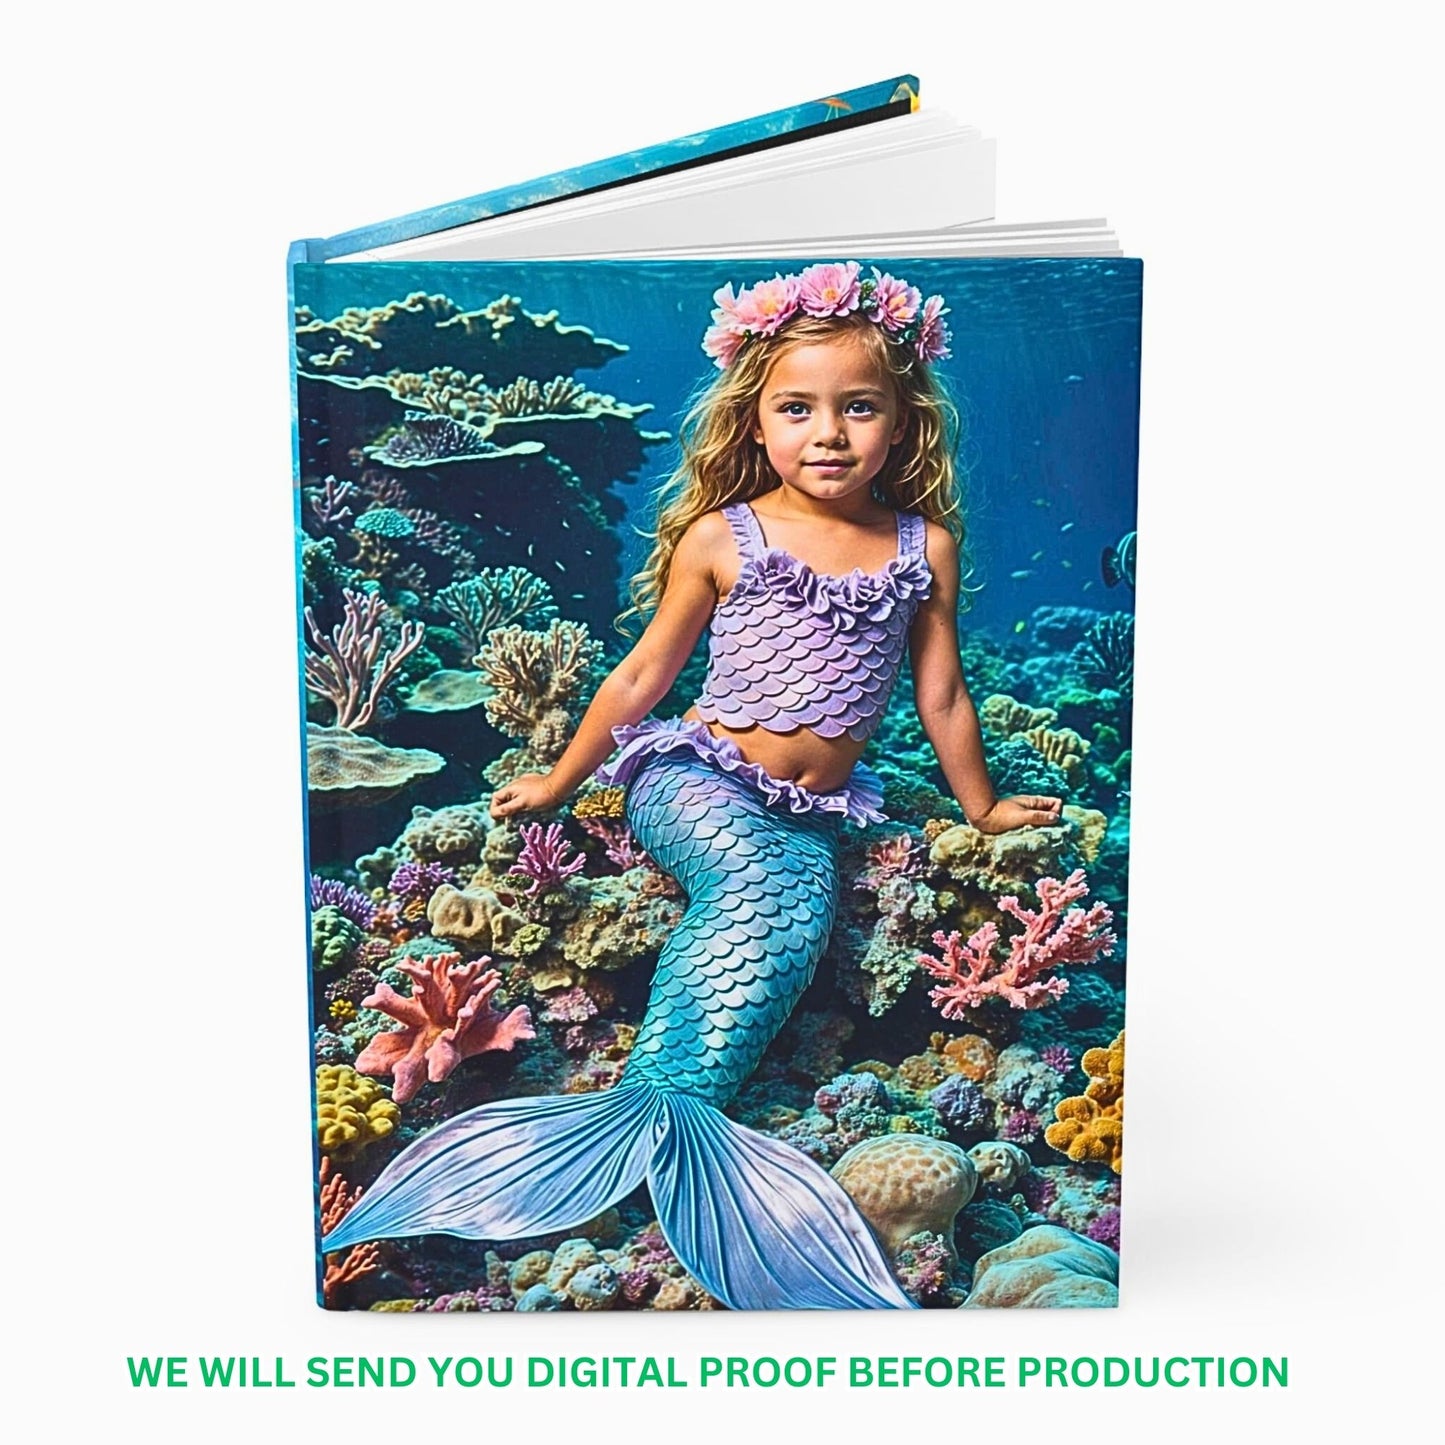 Capture her dreams in a Custom Mermaid Journal, featuring her own photo. This personalized gift for girls is perfect for birthdays, offering a whimsical way to preserve mermaid adventures and inspire creativity.